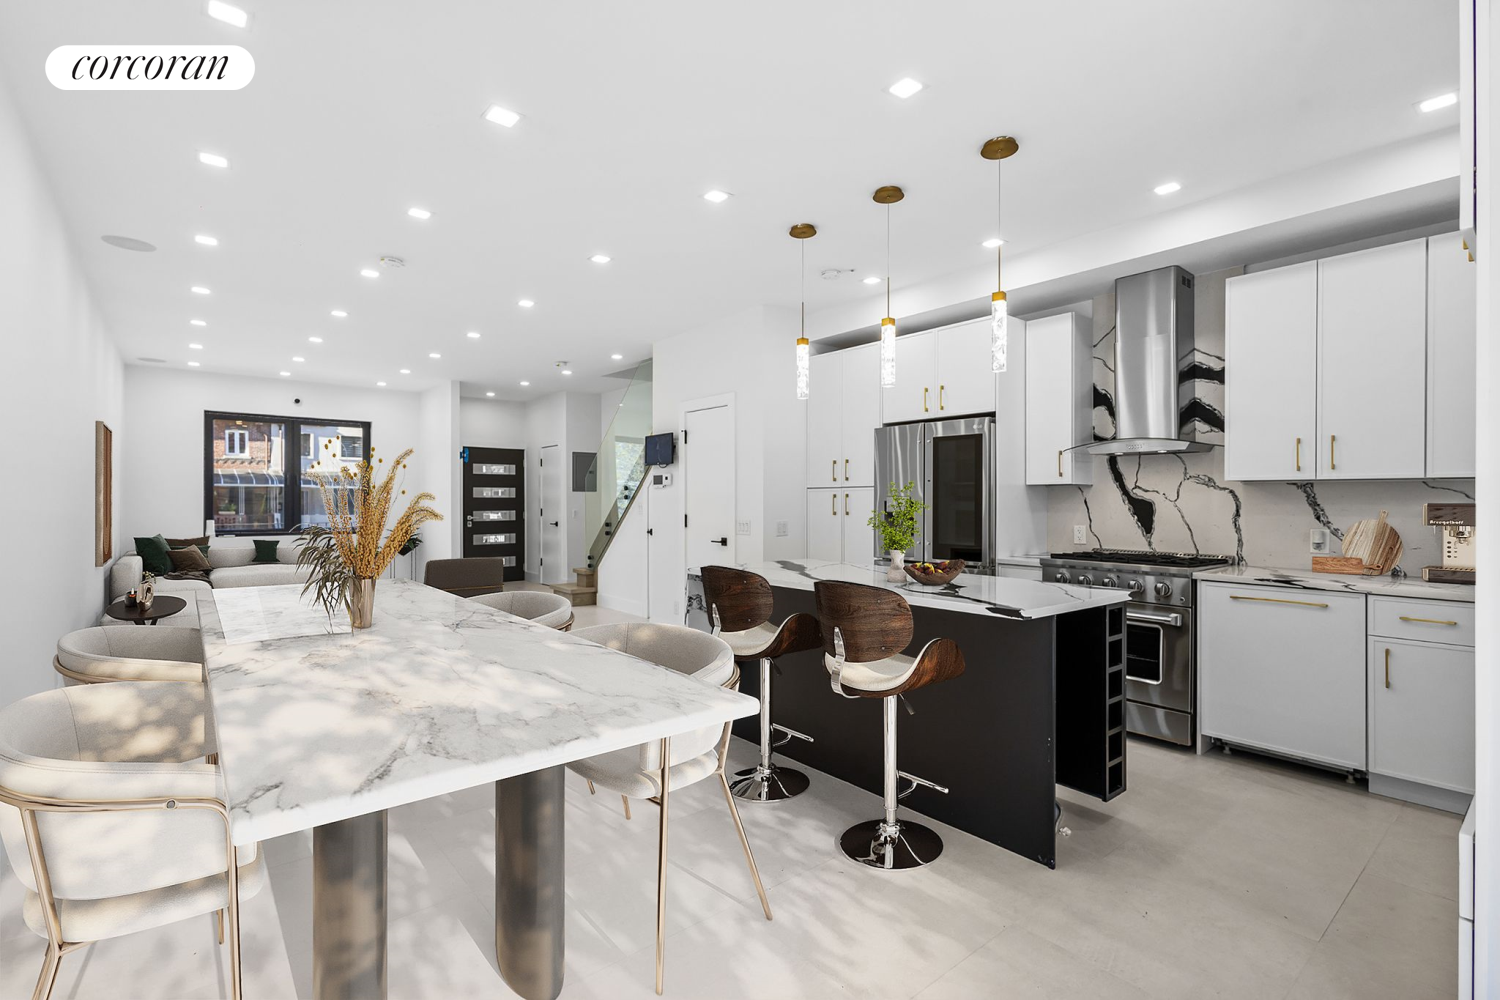 Tour 9 Chef's Kitchens That Are Enviably Chic and Spacious